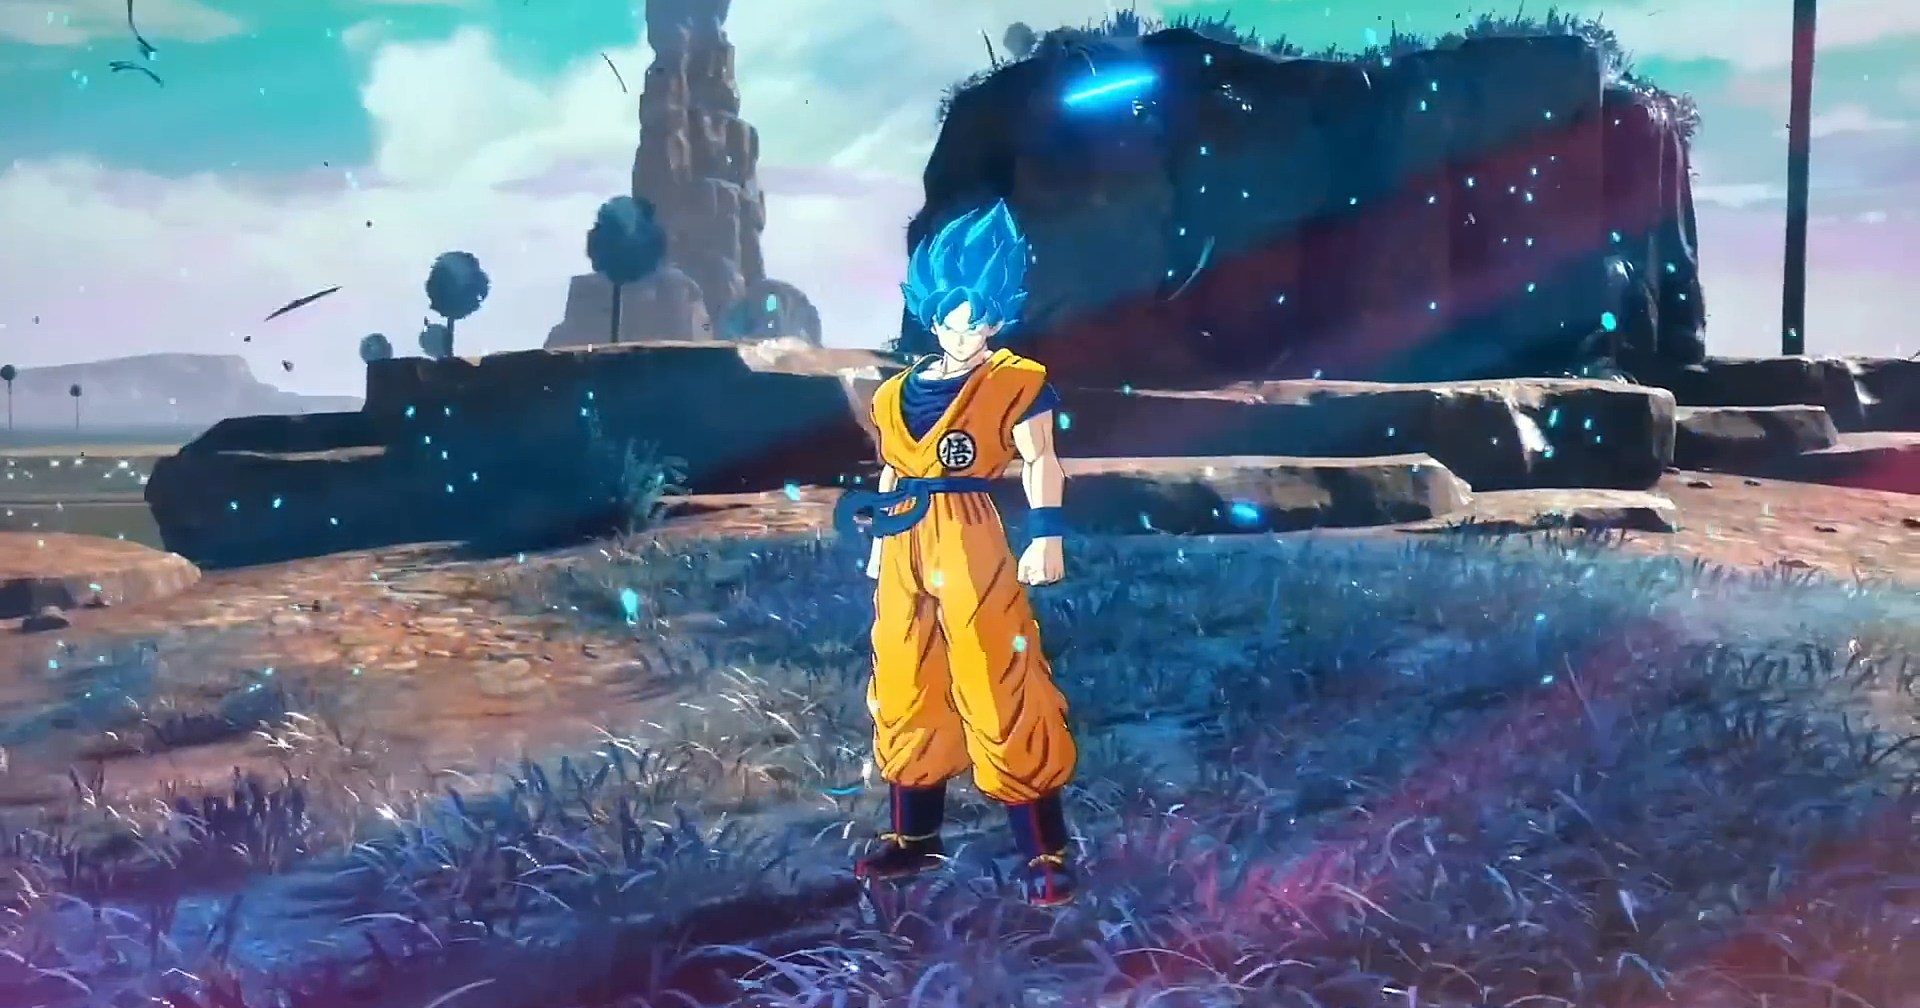 In the new trailer for Dragon Ball Z Budokai Tenkaichi 4 in front of a rocky landscape we see Son Goku as Super Saiyan Blue.